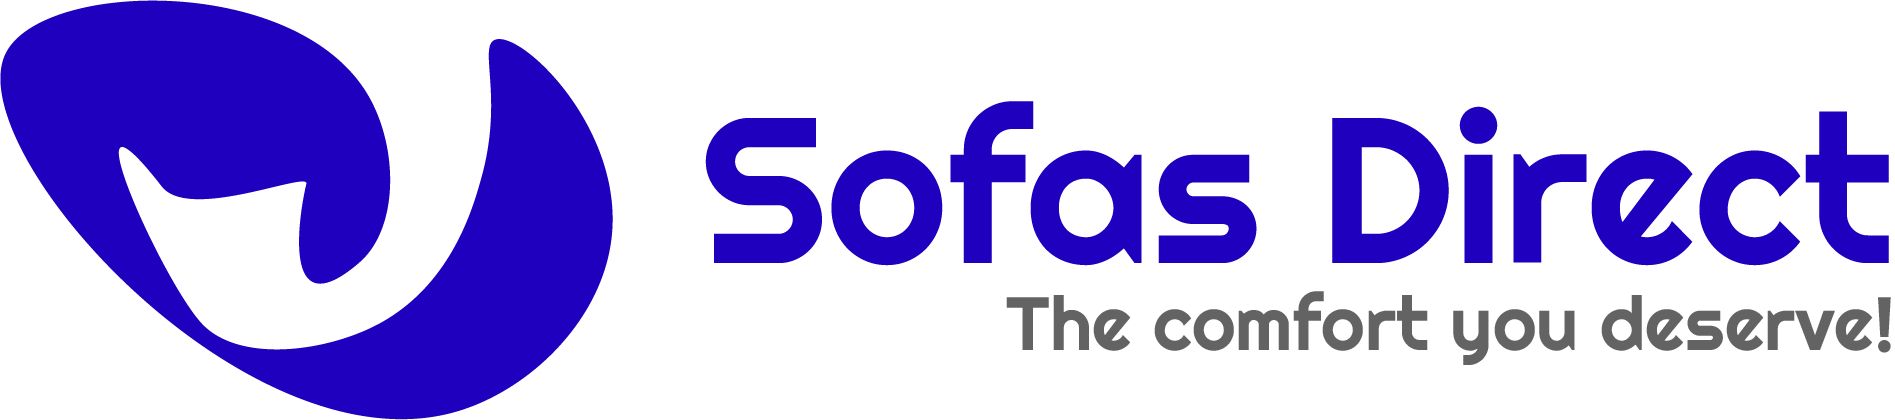 Sofas Direct all about comfort